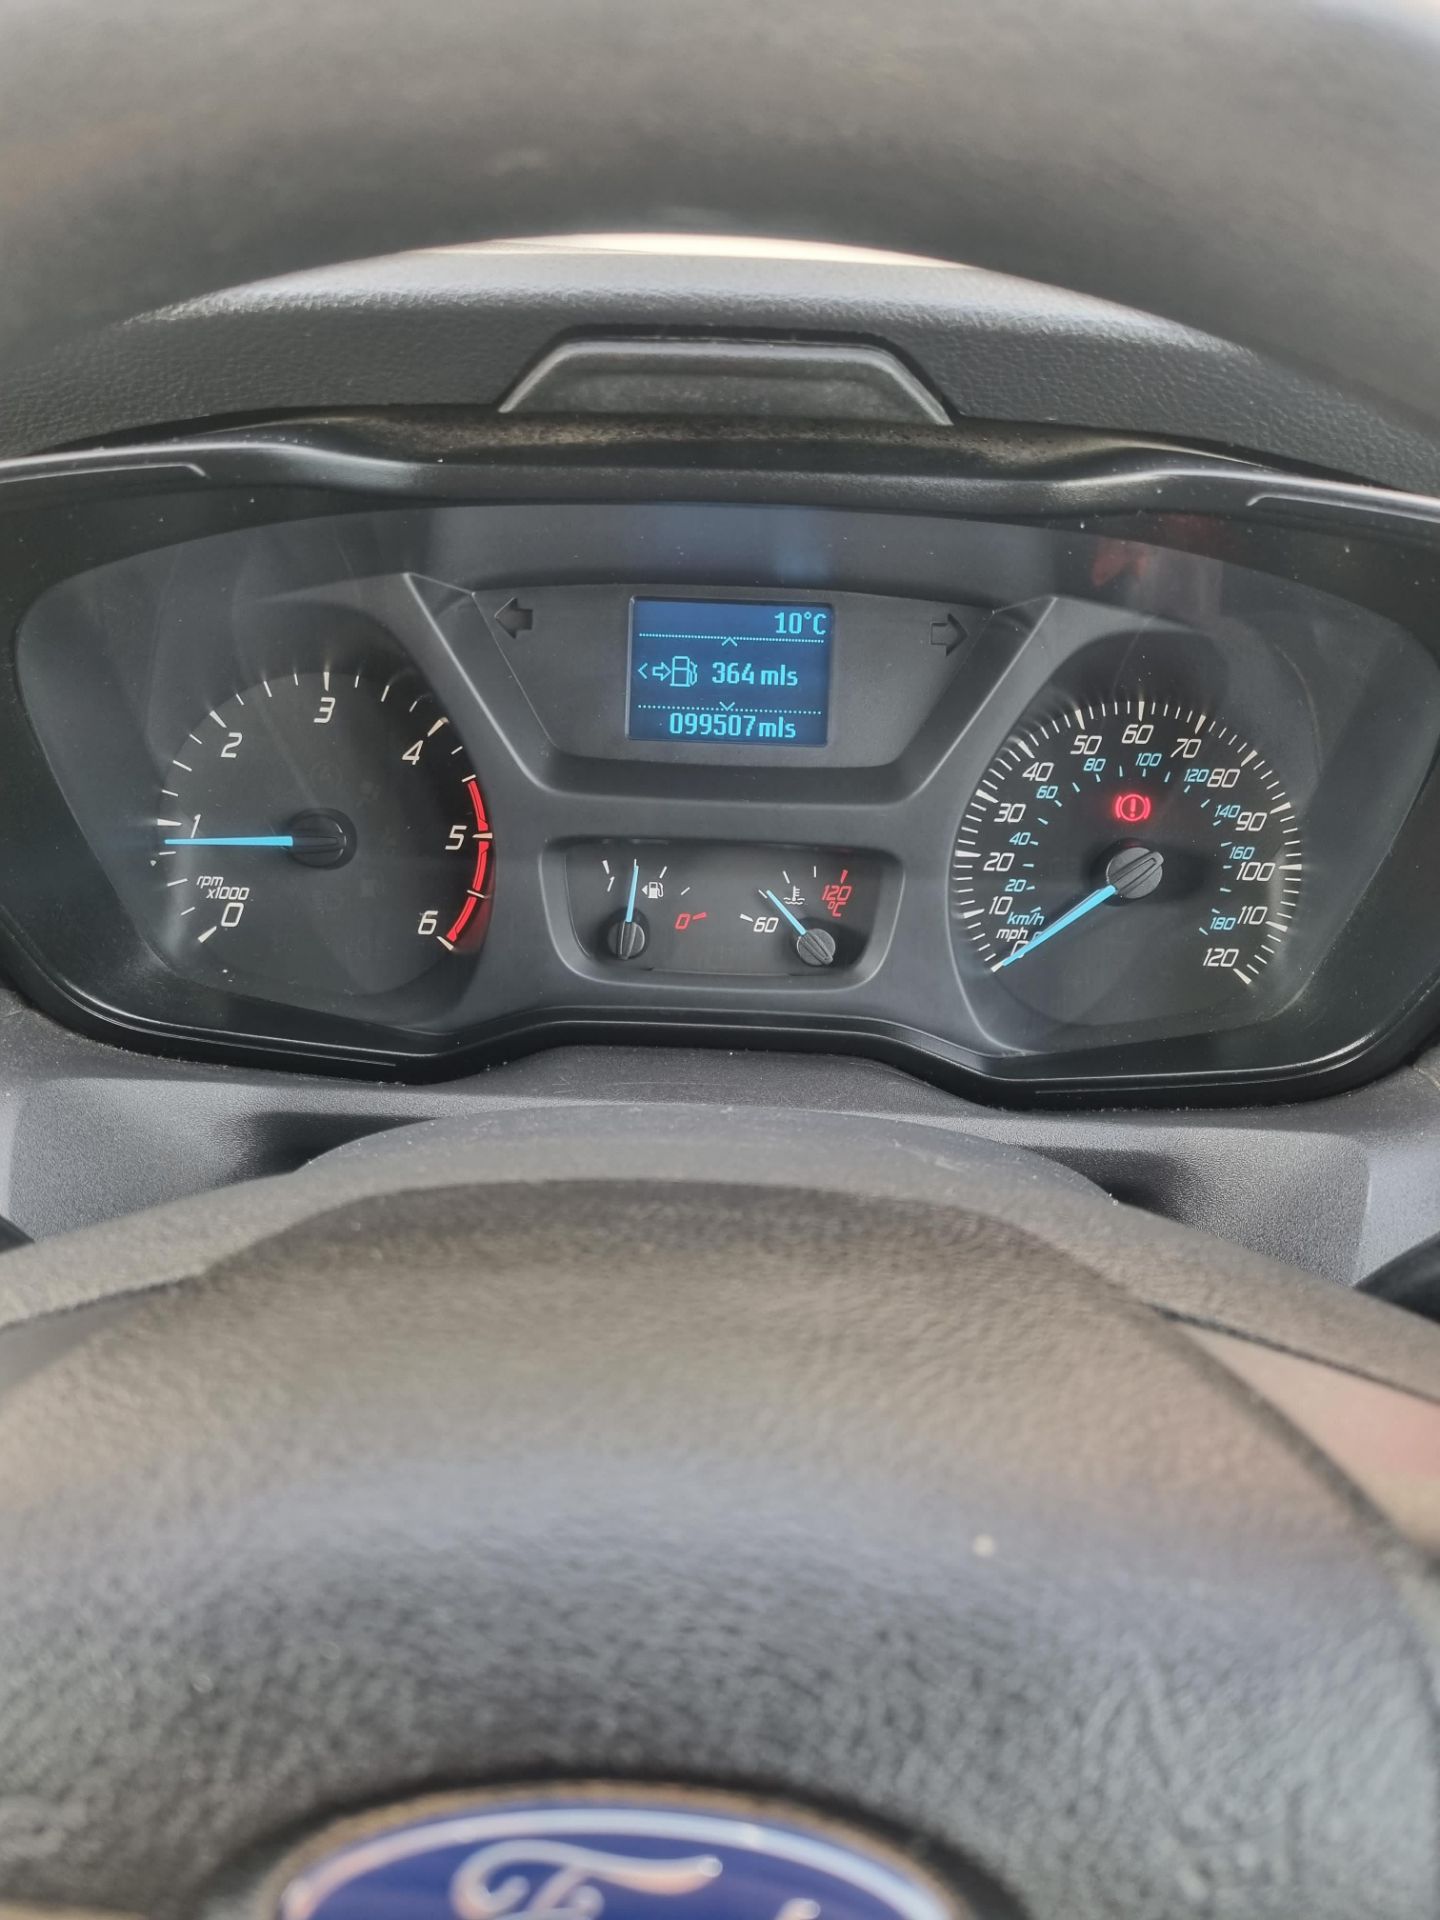 2019 FORD TRANSIT PANEL VAN - 99,507 MILES - SERVICED REGULARLY - READY FOR WORK - Image 2 of 8